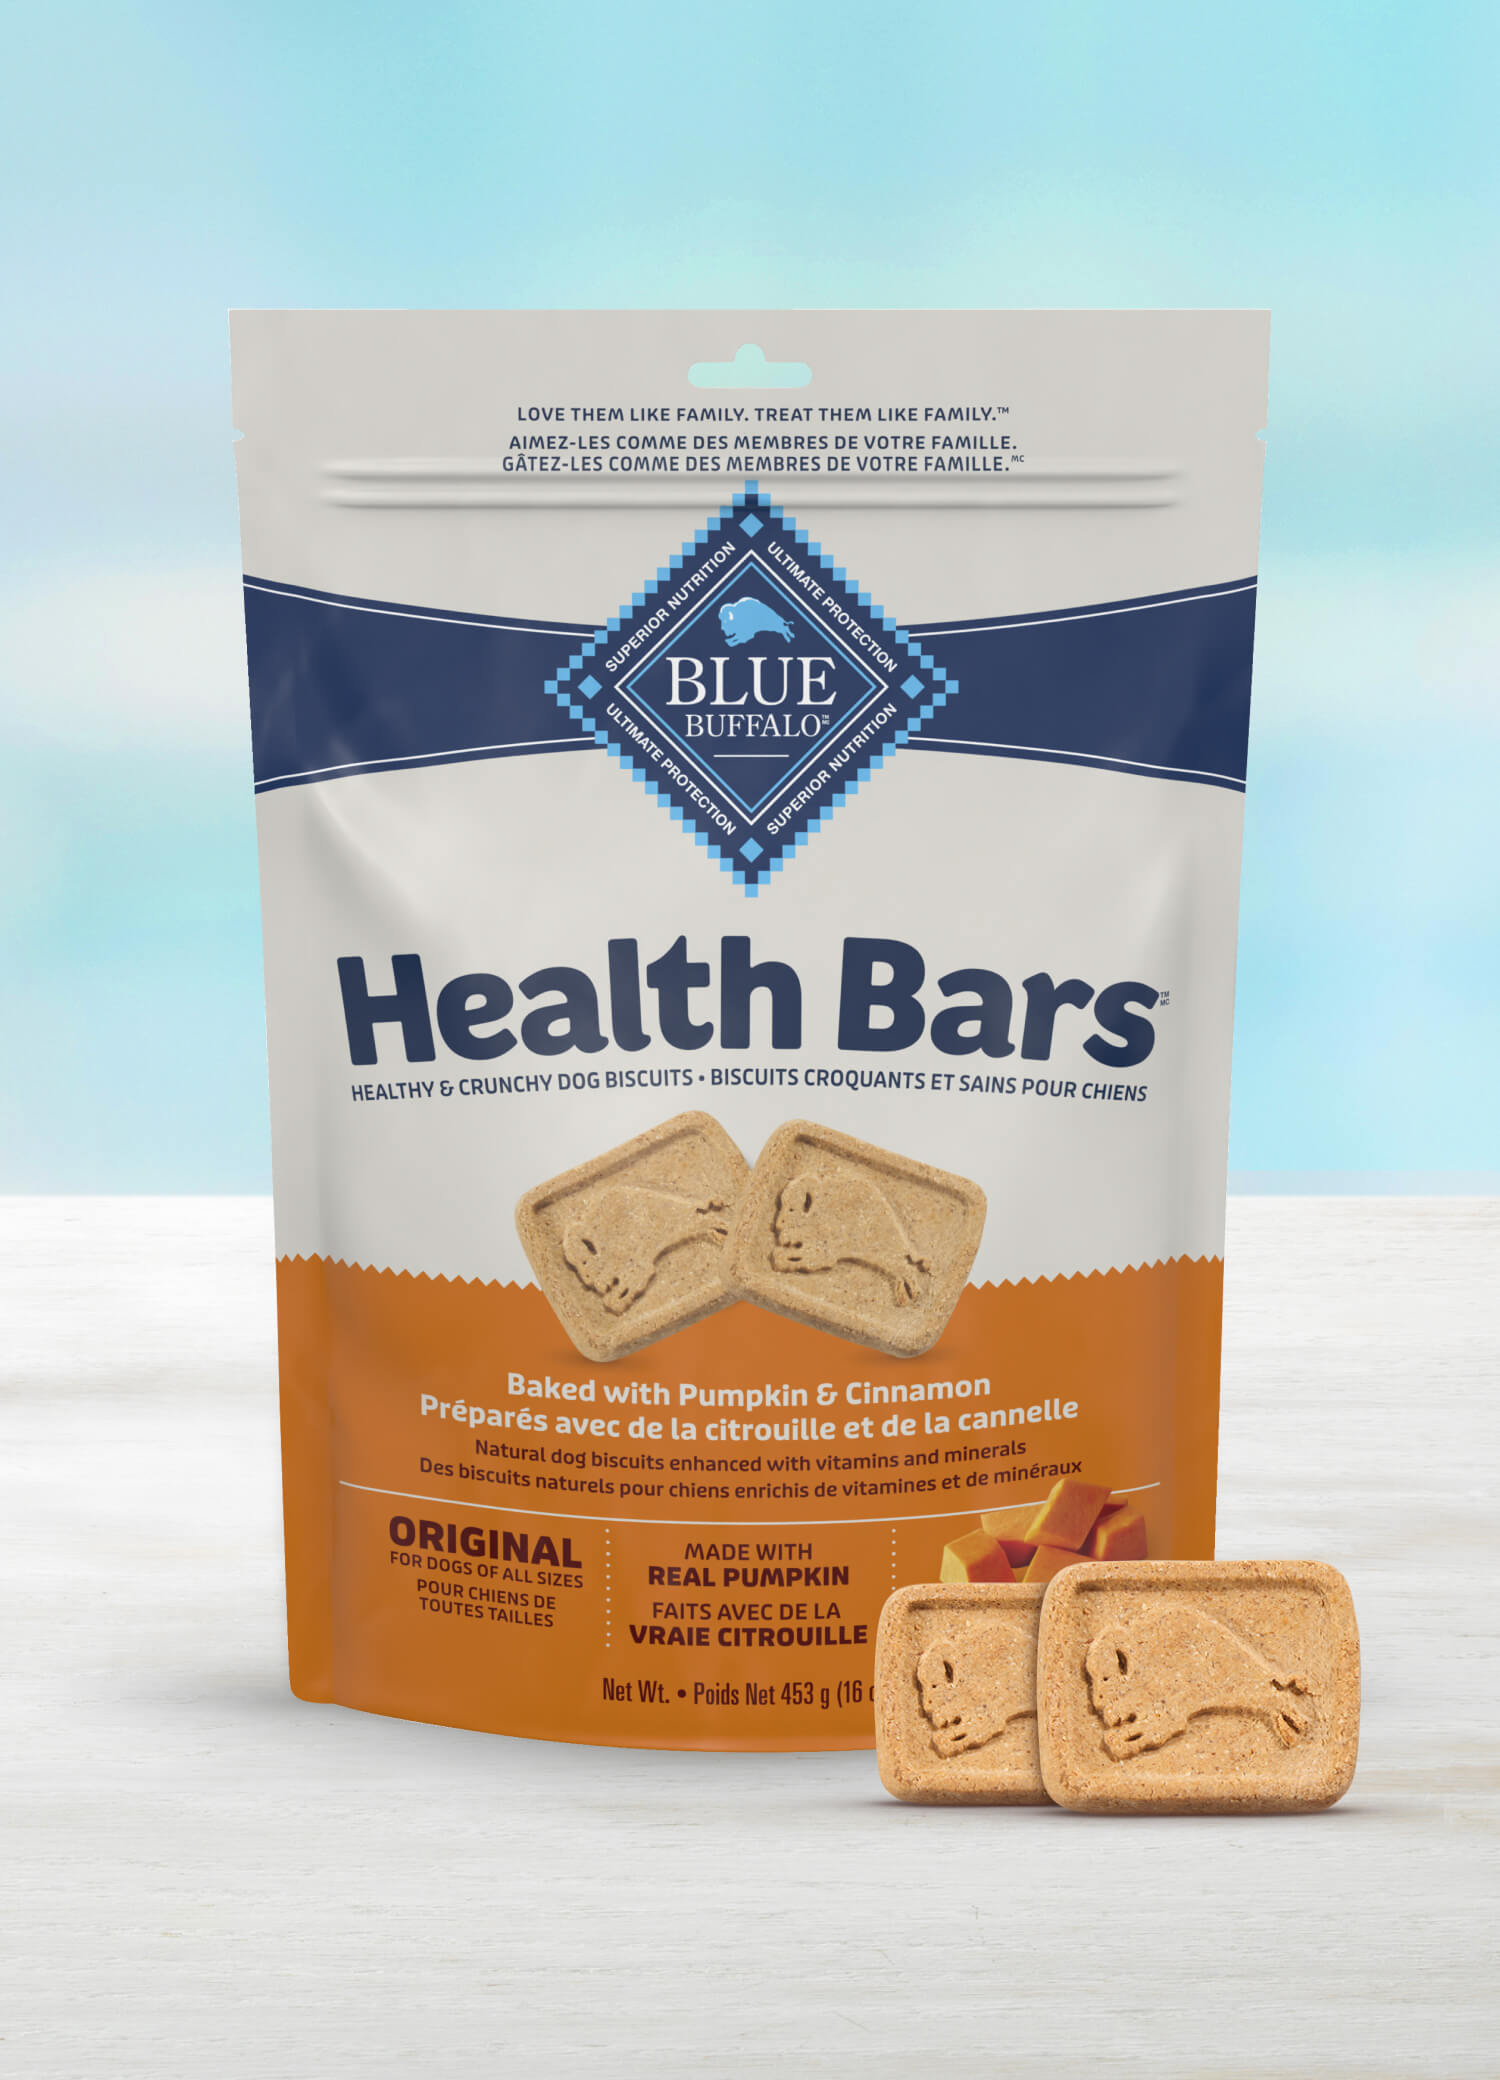 A package of Blue Buffalo Health Bars, baked dog biscuits with pumpkin and cinnamon, emphasizing natural ingredients and suitable for dogs of all sizes.